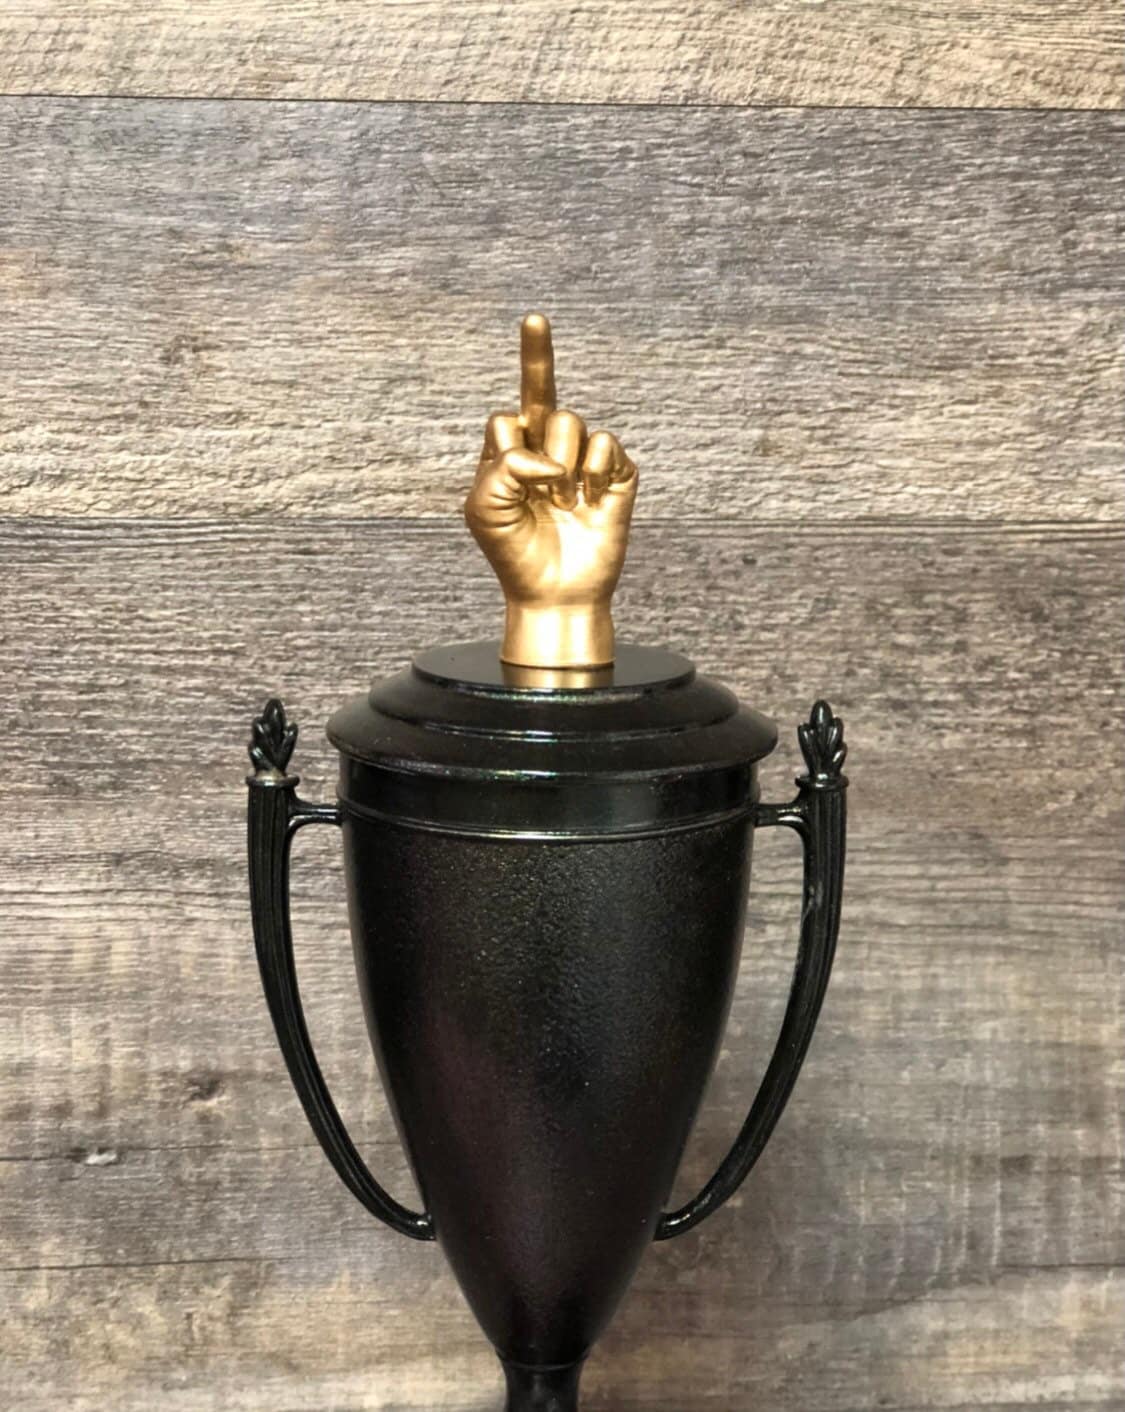 Middle Finger Funny Golf Trophy Hole In One Iridescent Cup Loser Award Adult Humor The Bird F*ck You One Finger Two Words Gag Gift